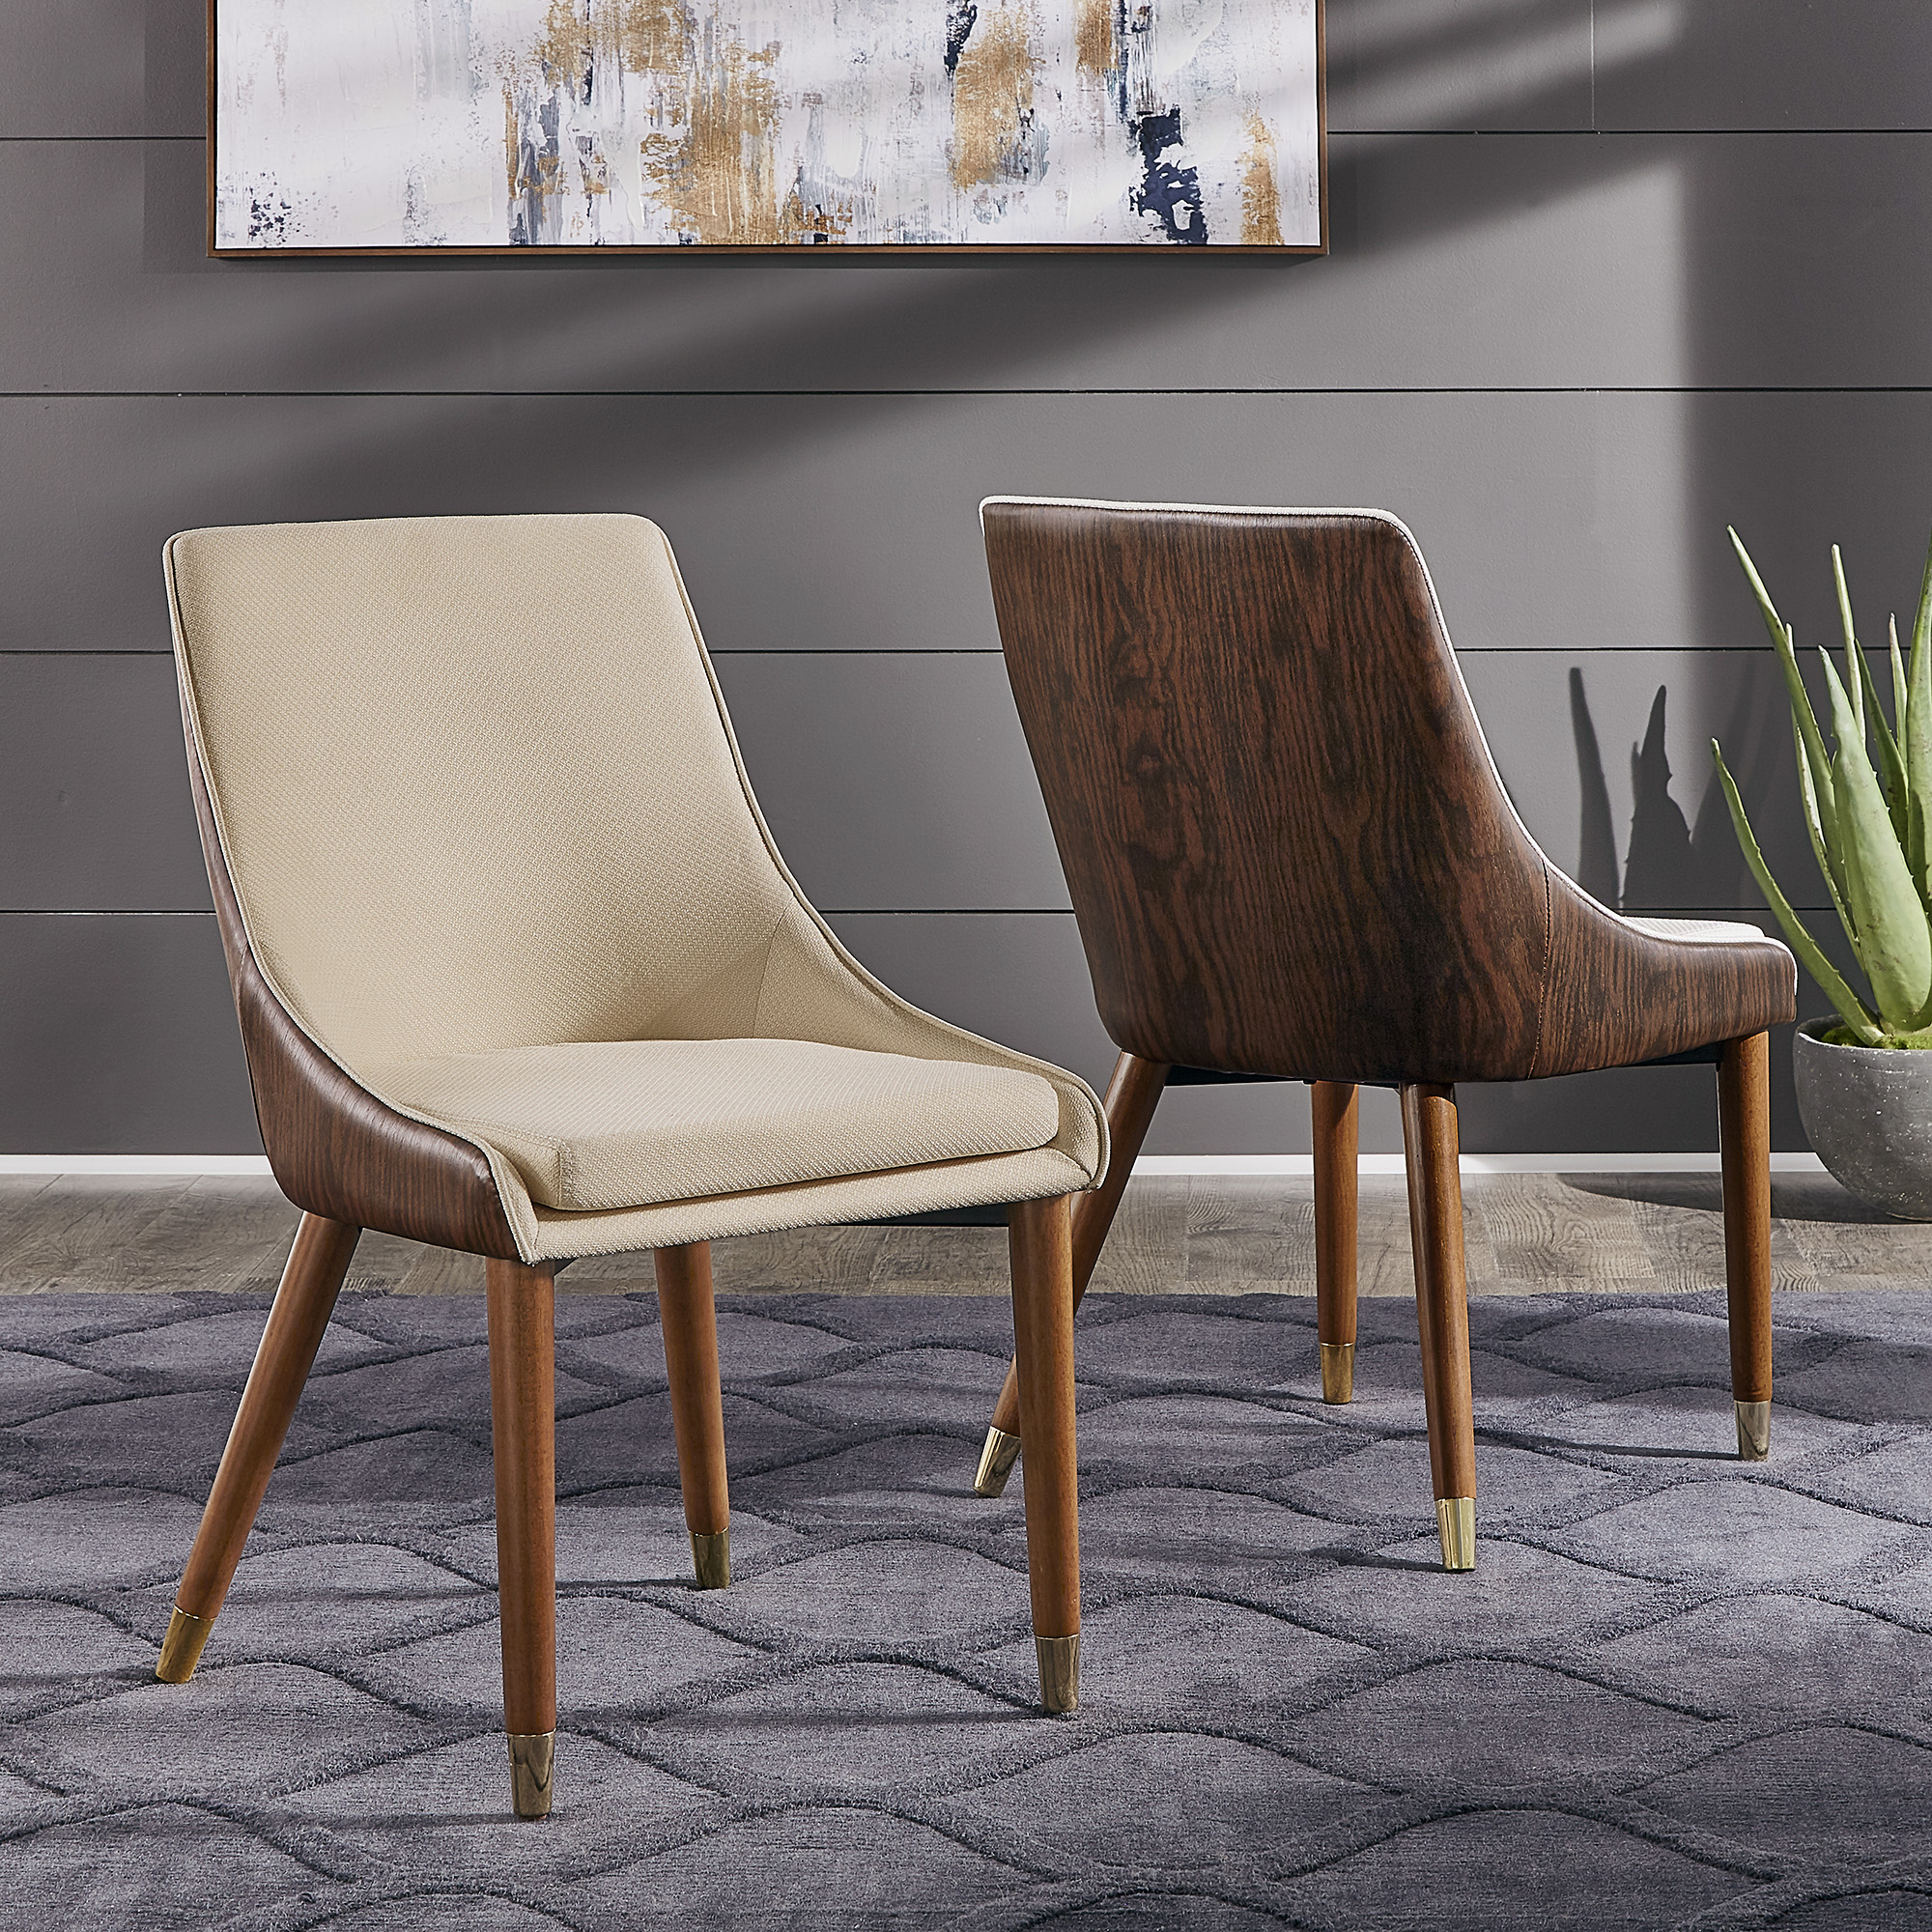 Two-Tone Fabric Upholstered Dining Chairs with Faux Leather Chair Back (Set of 2)